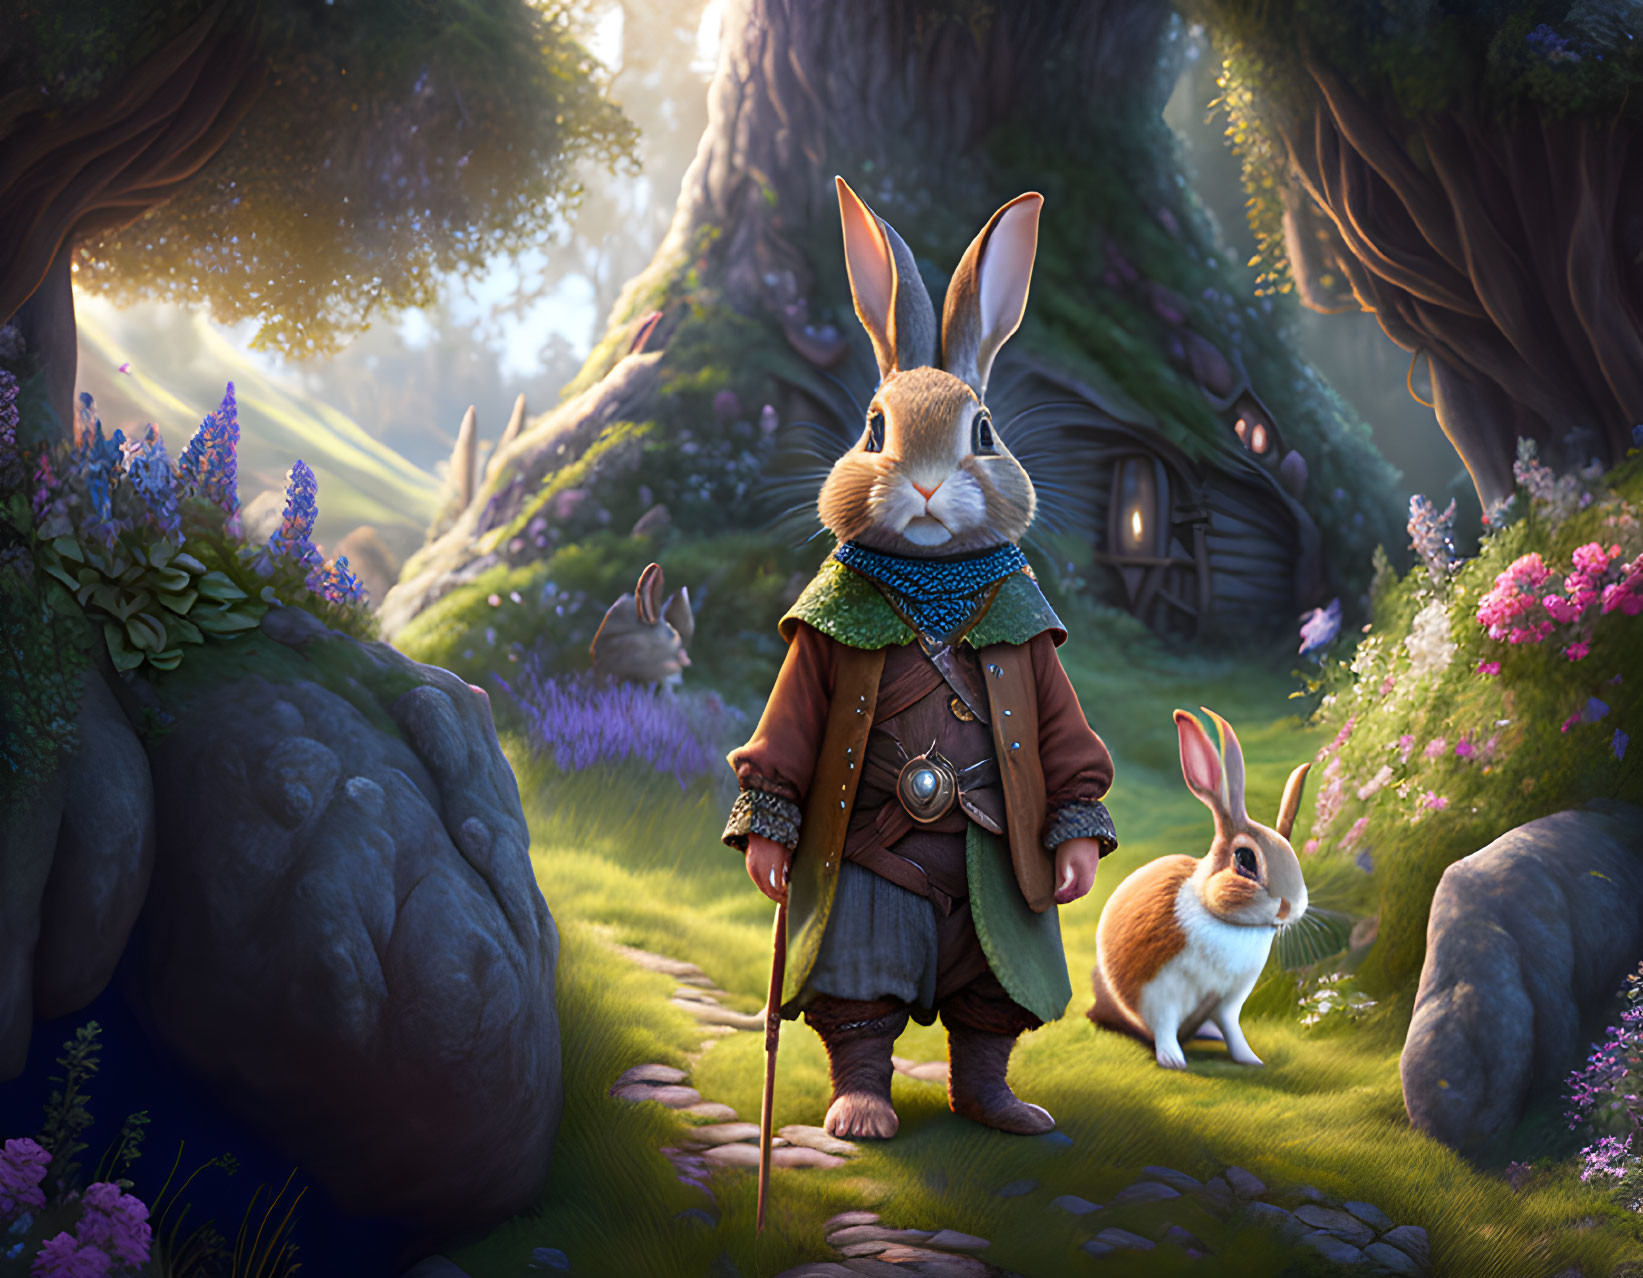 Anthropomorphic rabbit with walking stick in forest setting.